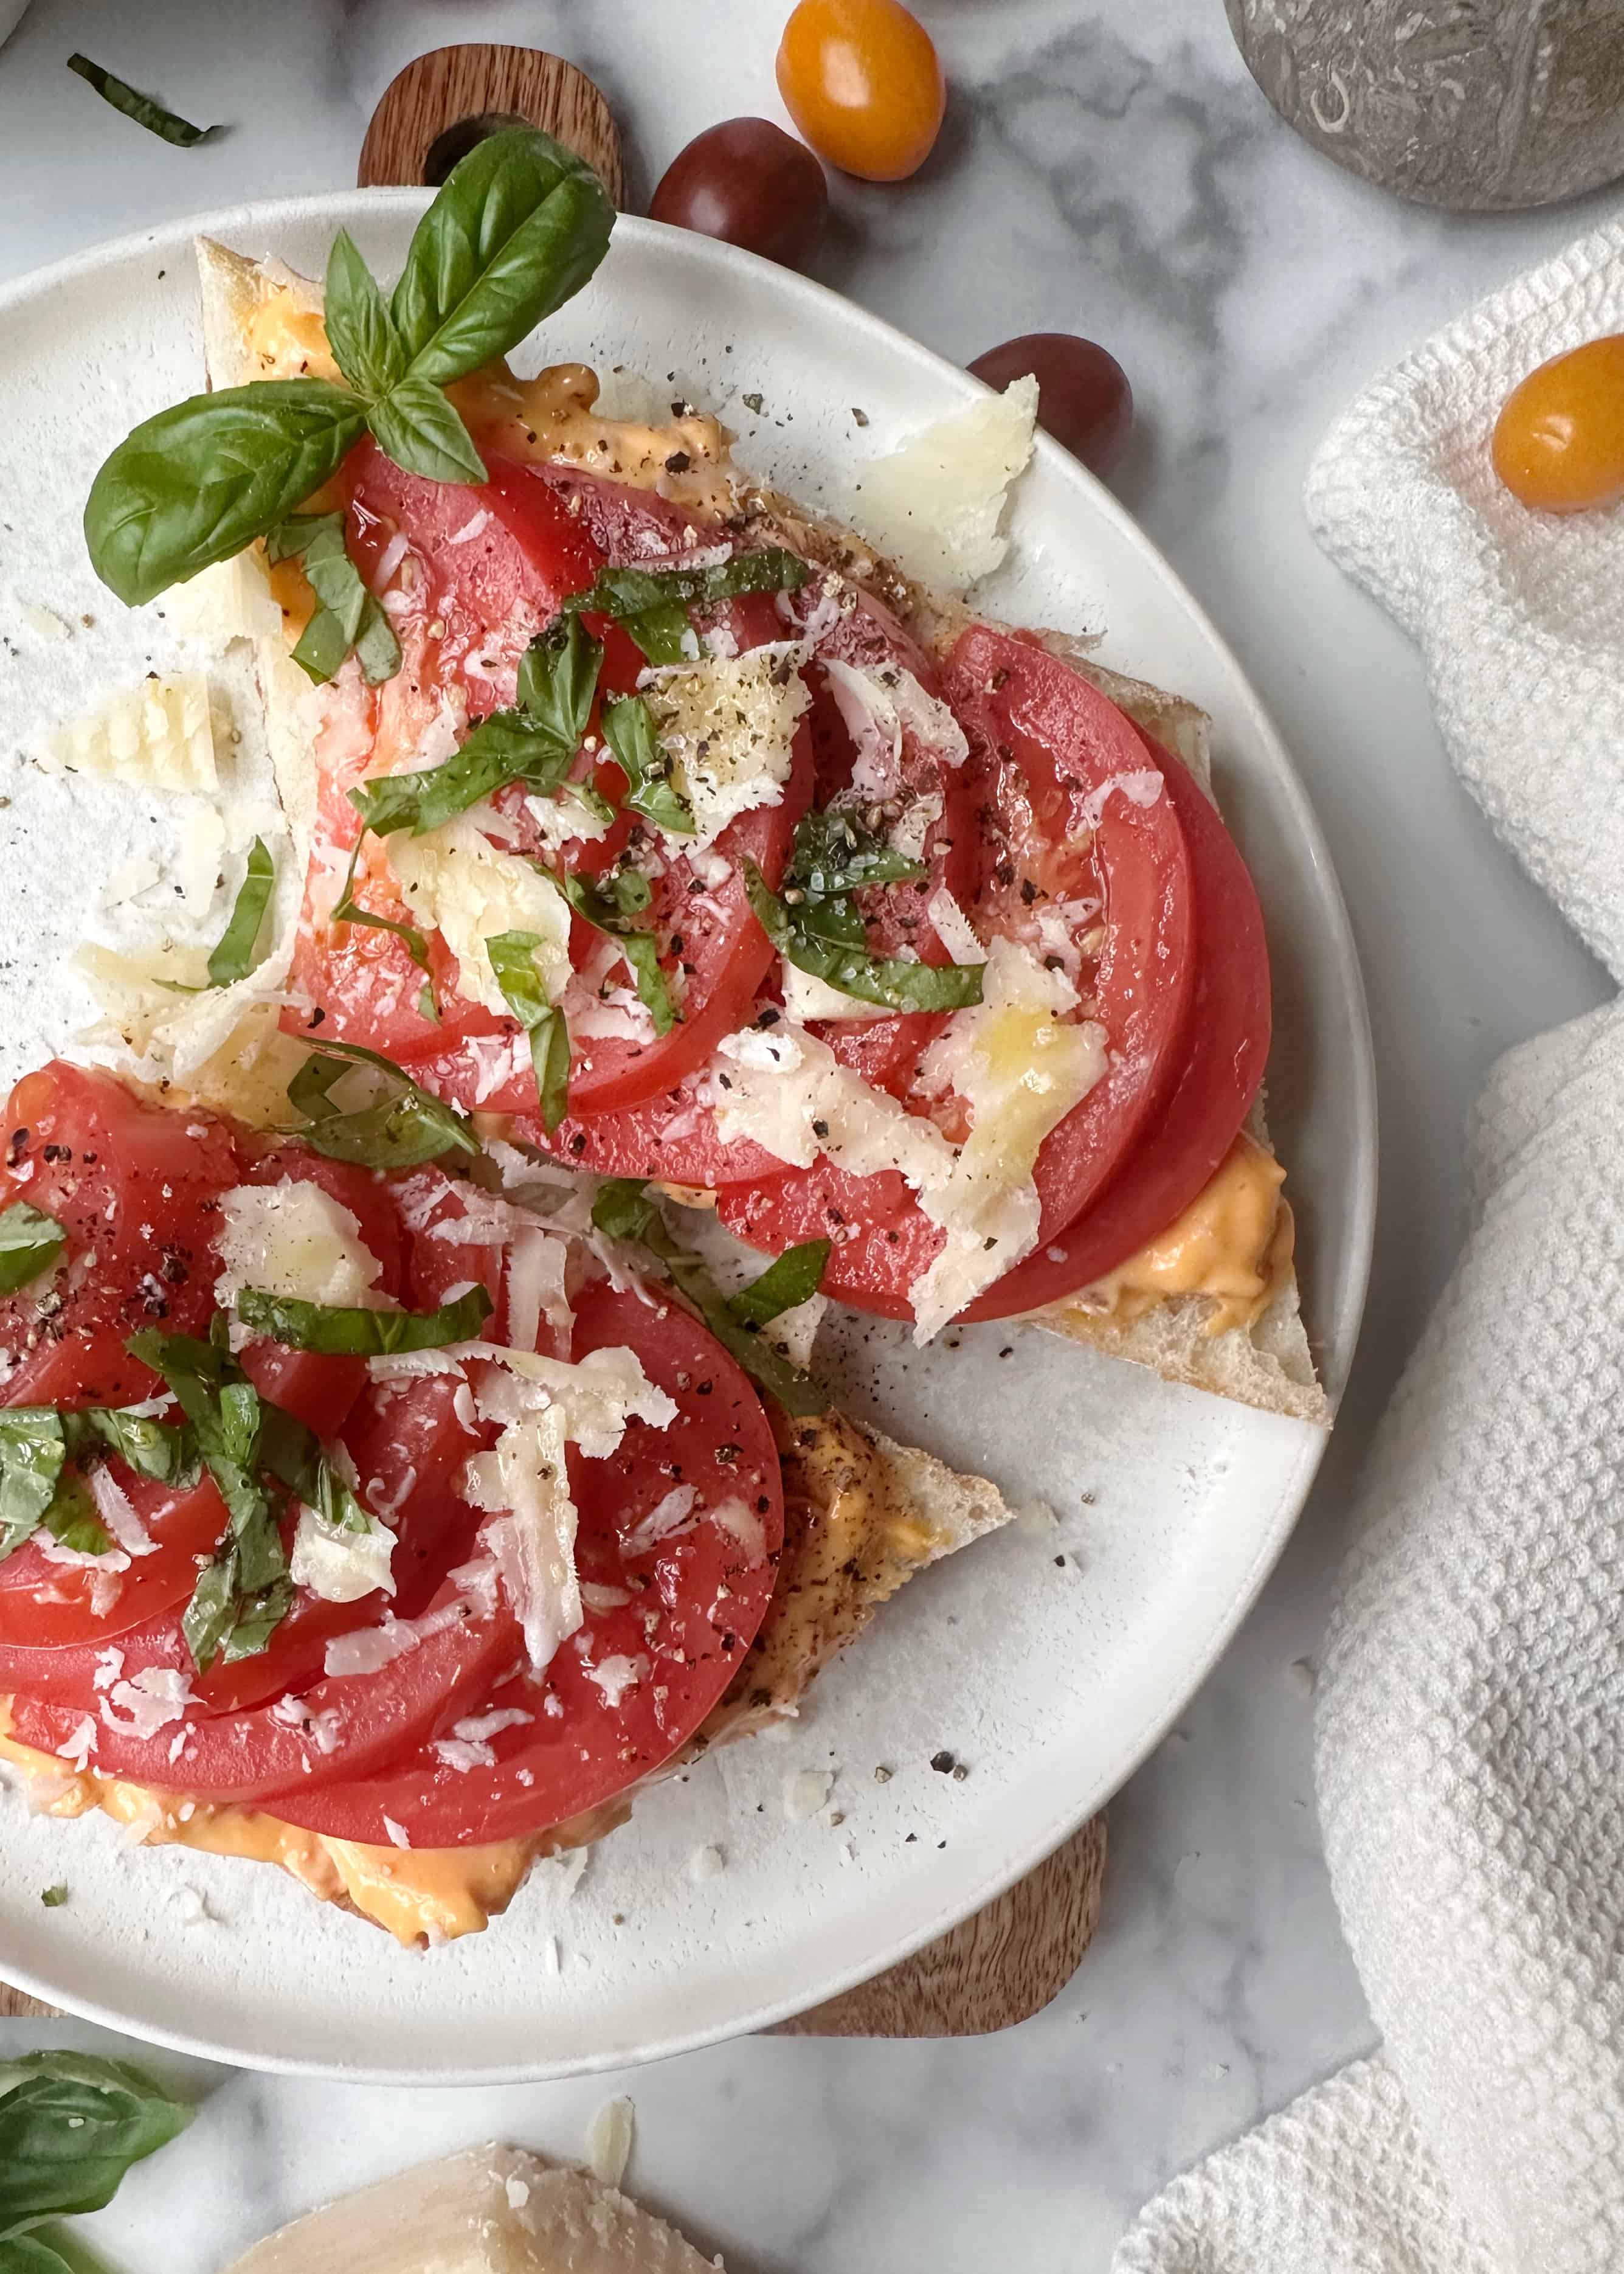 tomato toast with calabrian chili spread and parmesan